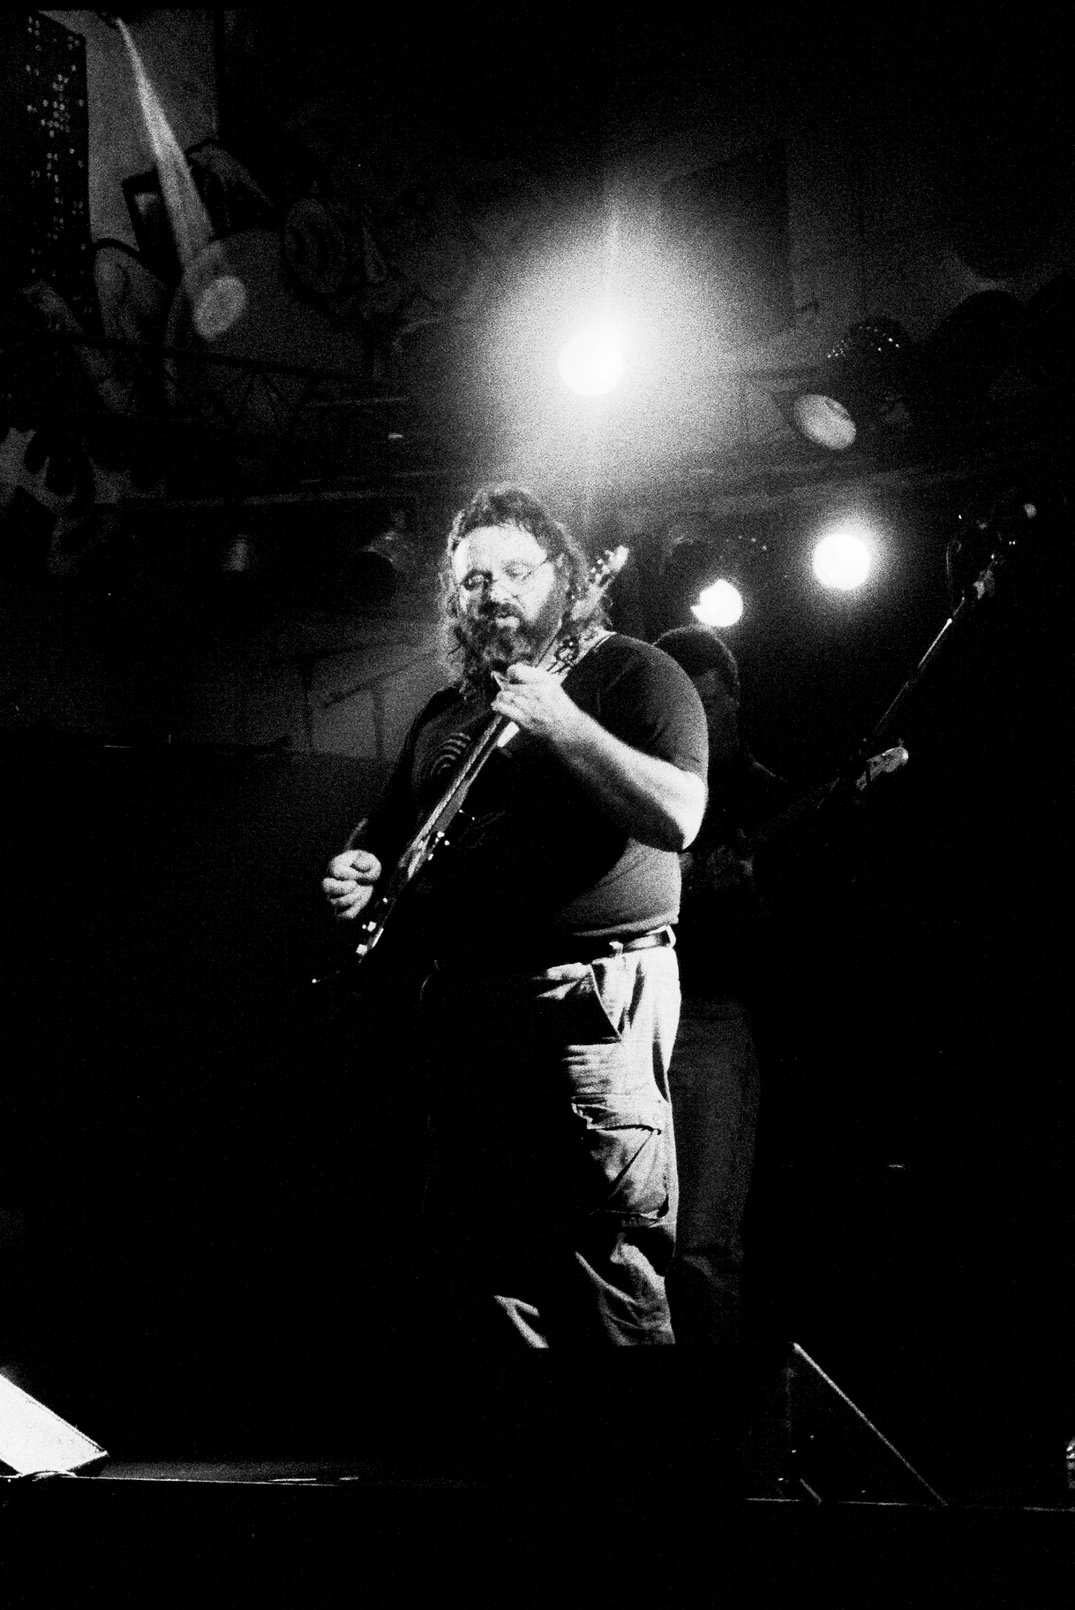 Ellis Kell opening for Bo Diddley in 1999. Photo by Kevin Schafer.